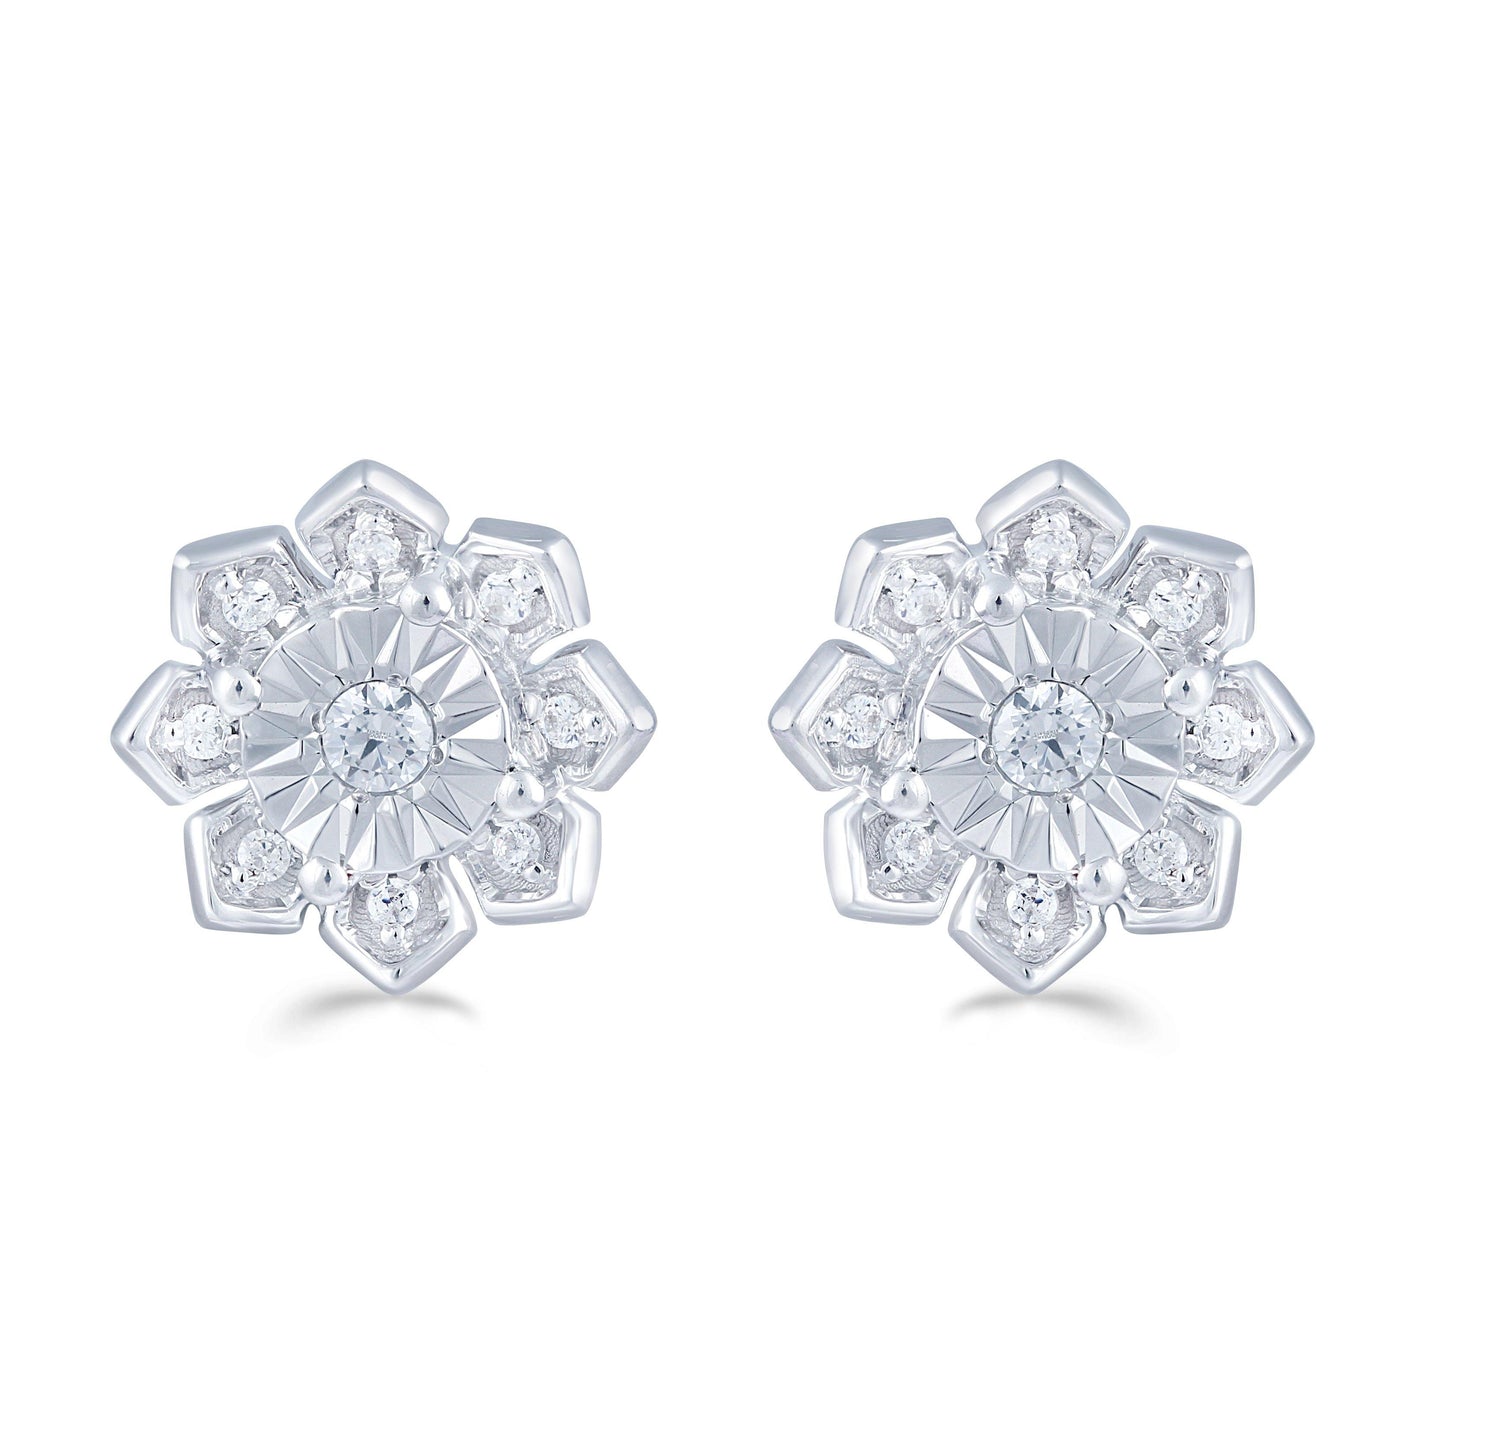 1/6Ct TW Diamond Floral Cluster Fashion Stud Earring in Sterling Silver - Fifth and Fine